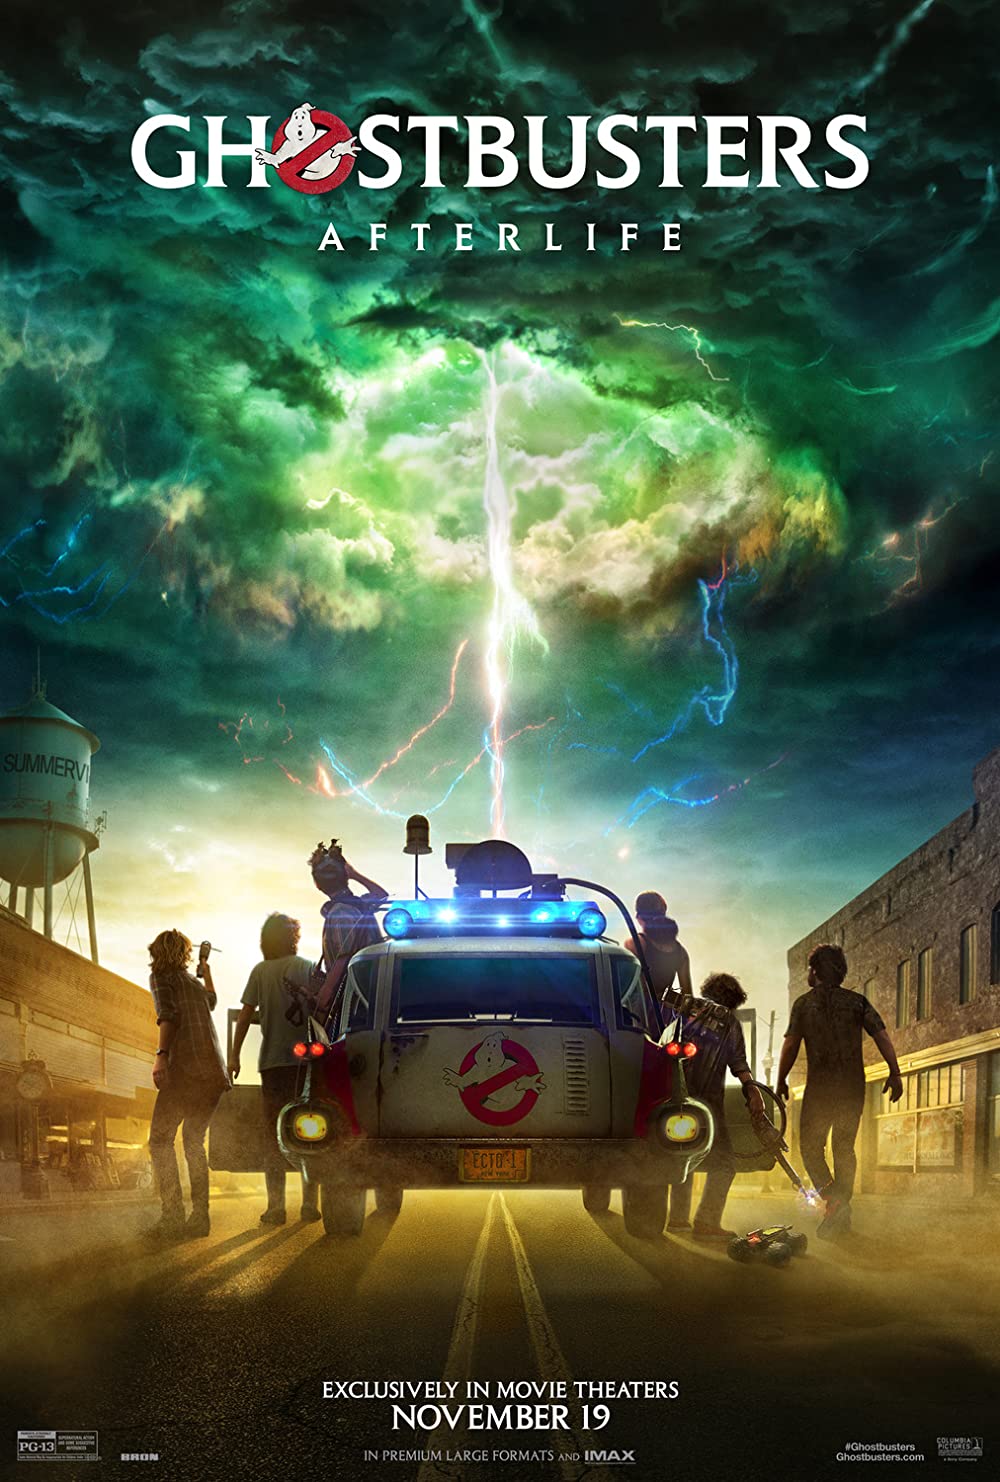 Ghostbusters: Afterlife (2021) 7:30 P.M. Tuesday Special @ O'Brien Theatre in Renfrew